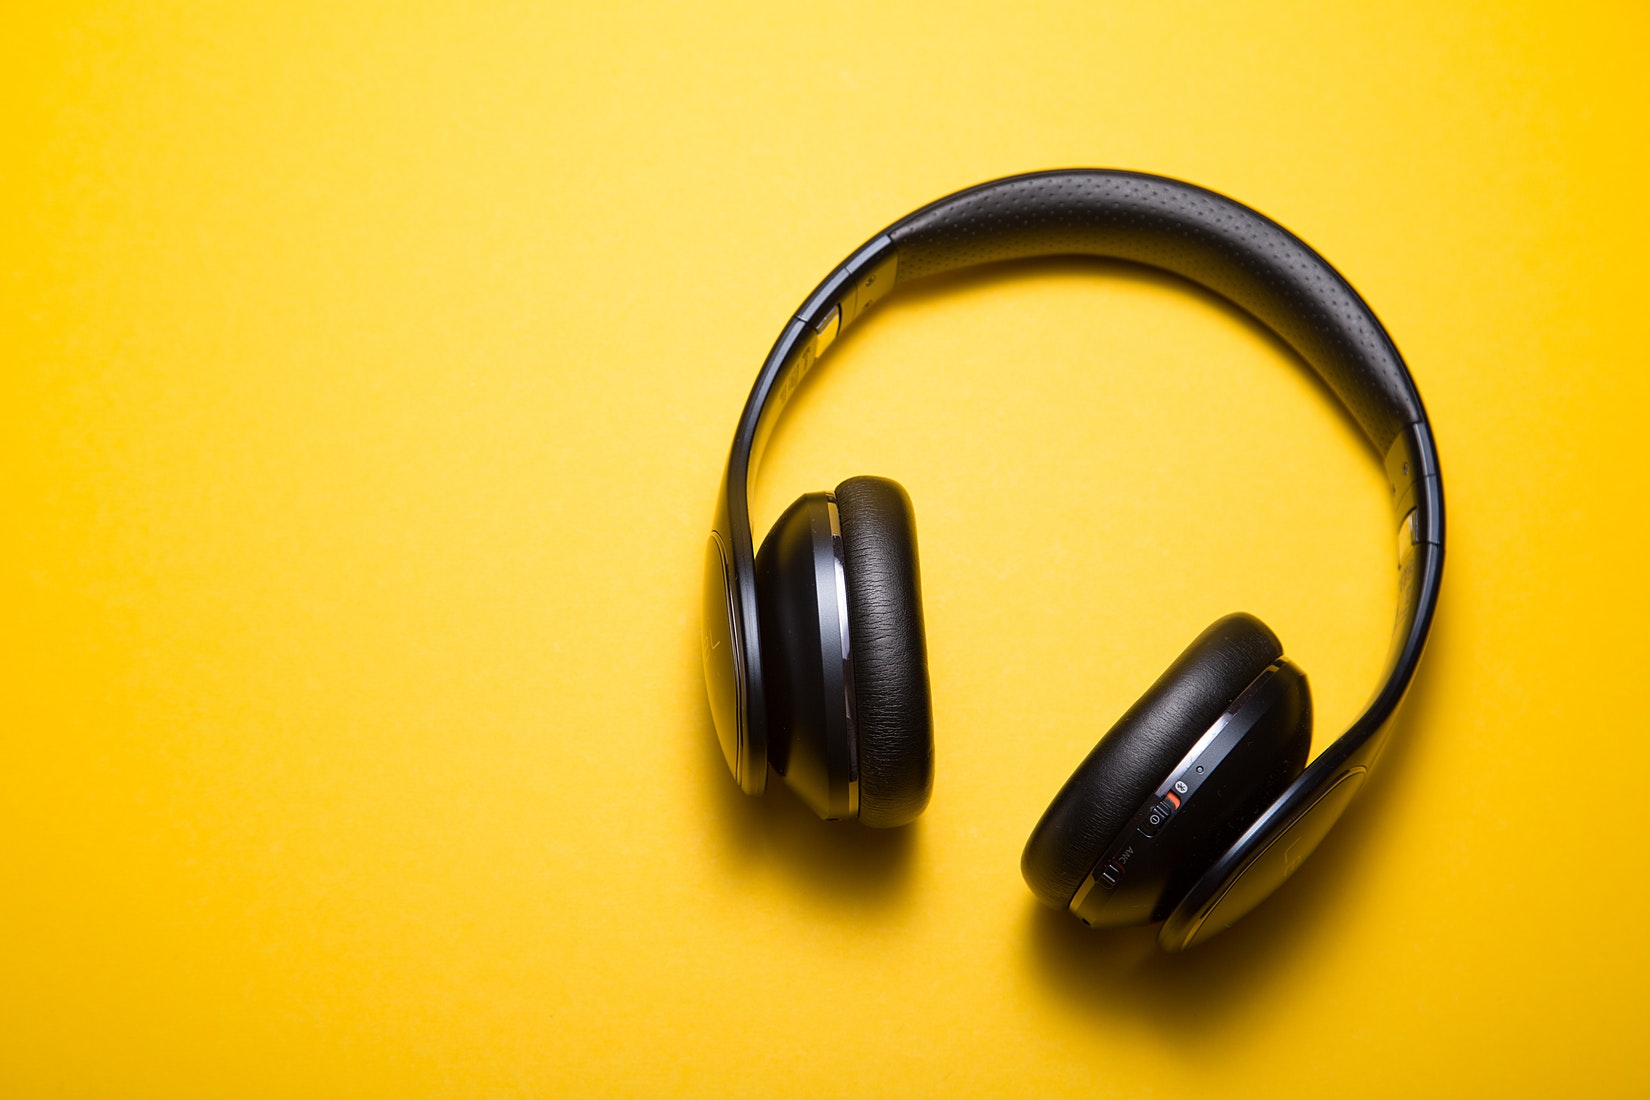 Black wireless headphones against a vibrant yellow background.